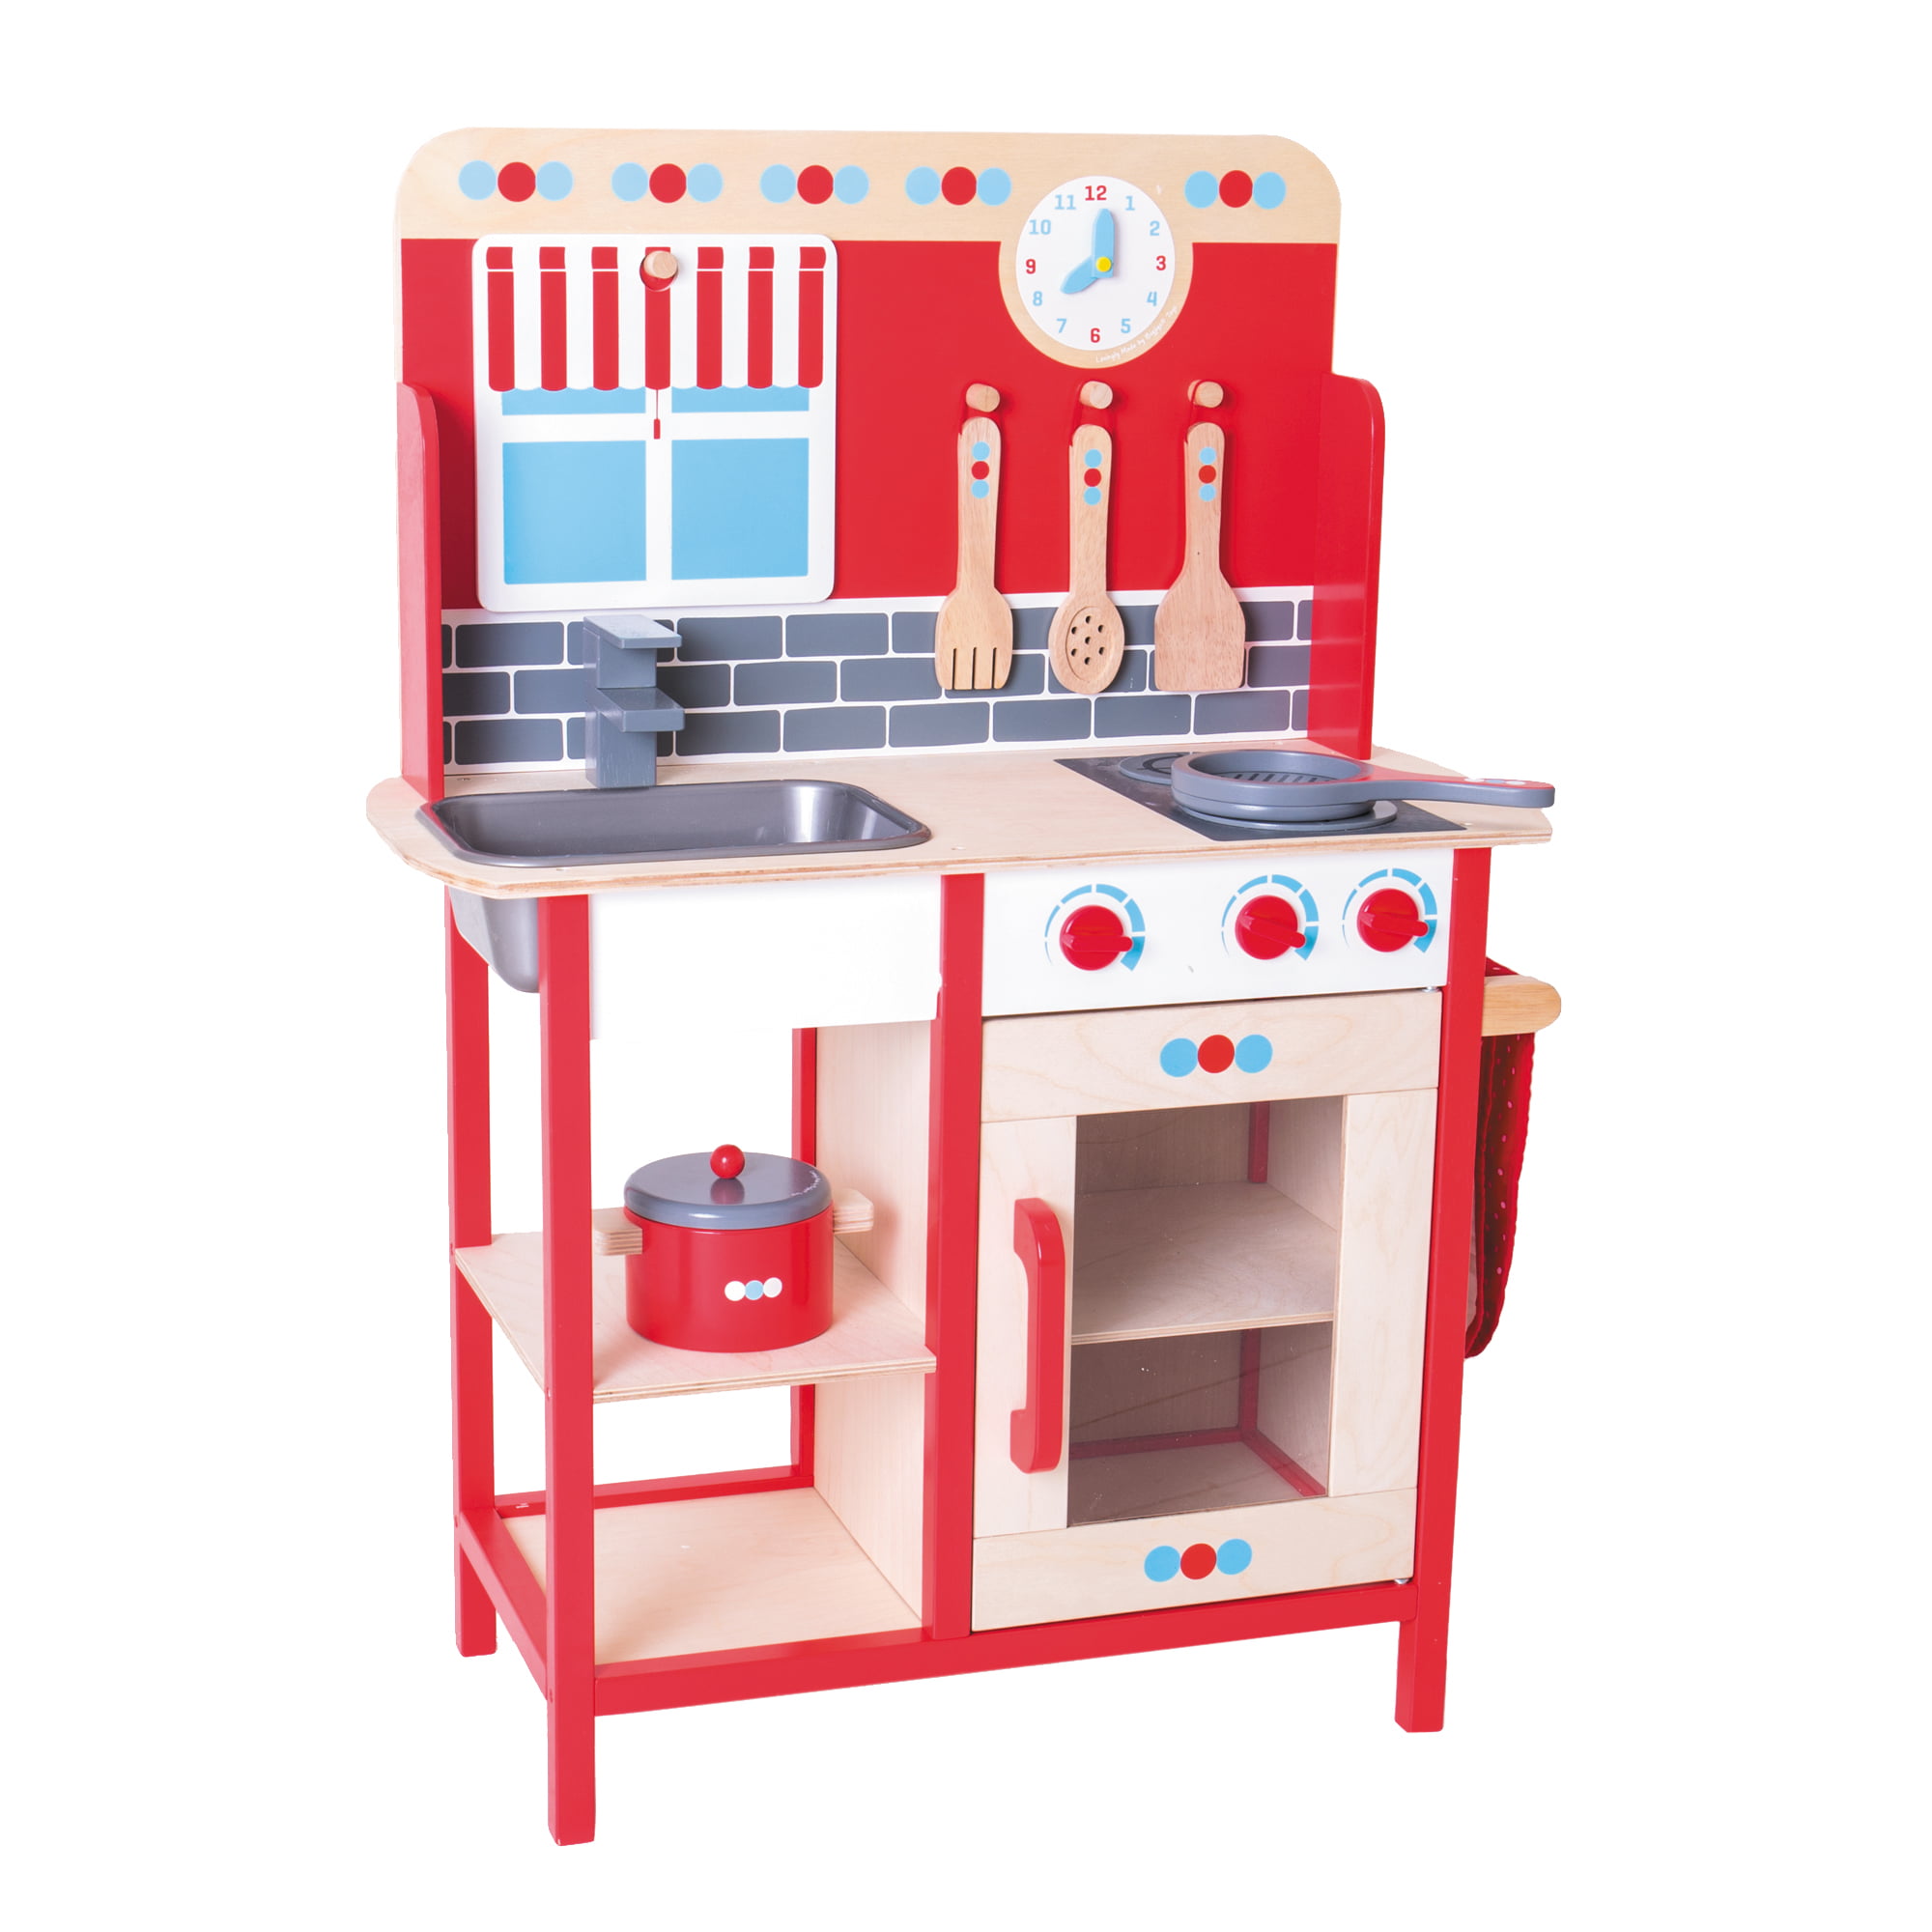 Bigjigs Toys Wooden Salad Play Set Pretend Roleplay Kitchen 